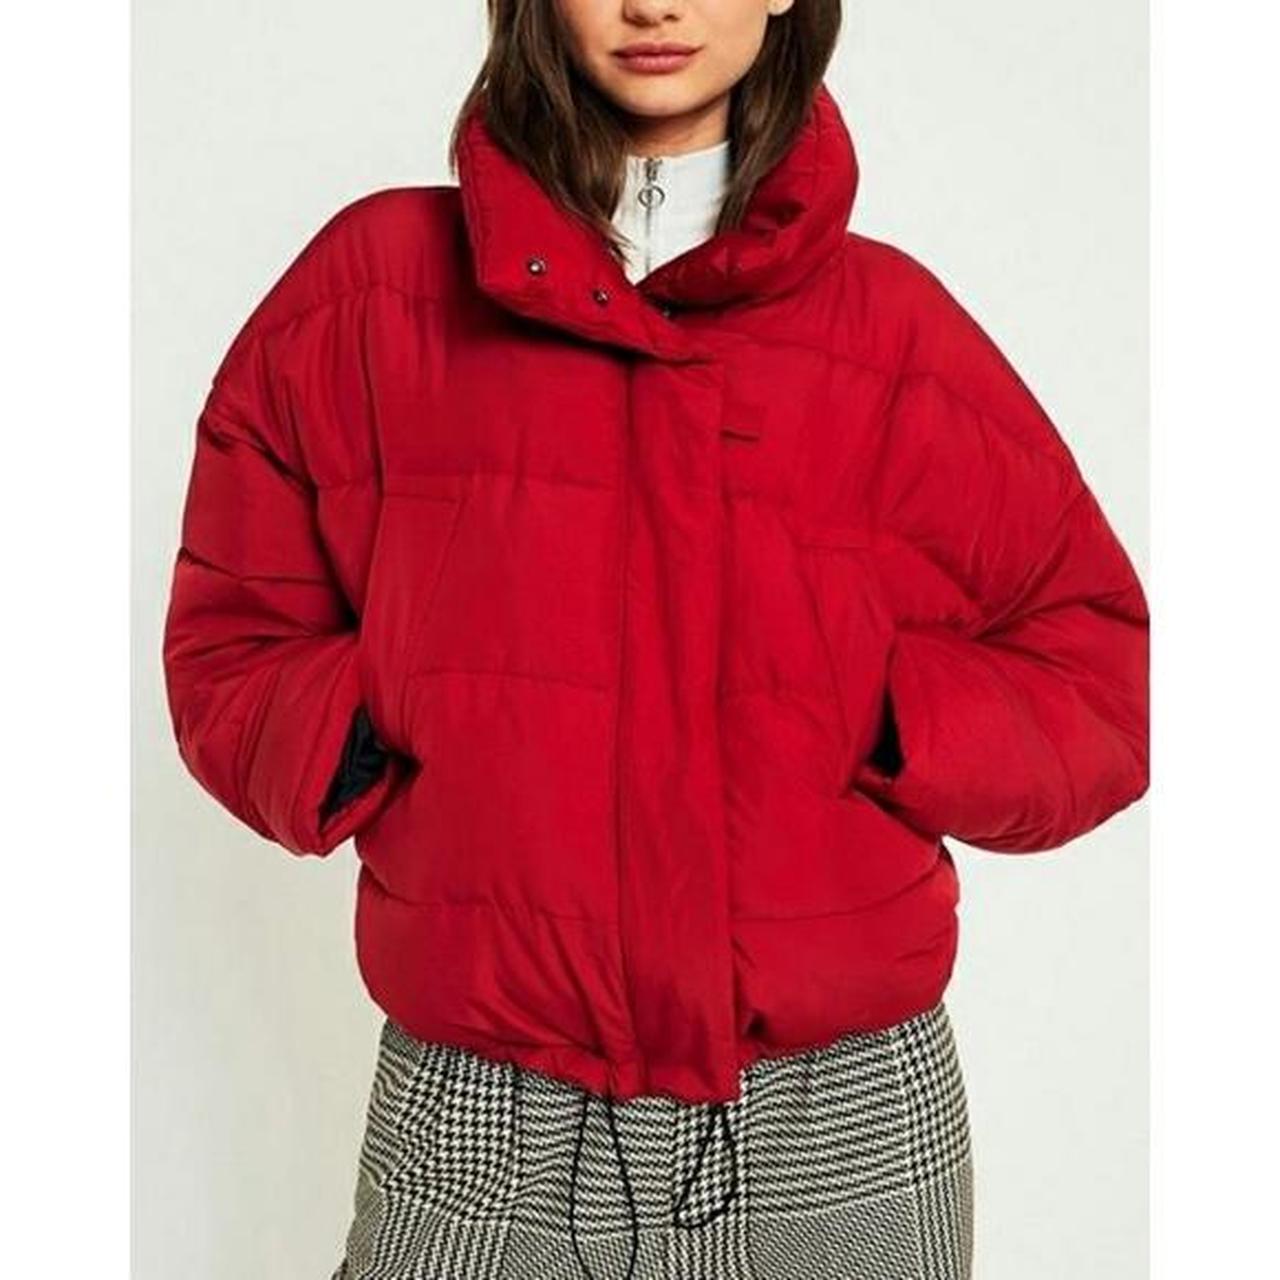 On hold Oversized red puffer jacket UO - Depop